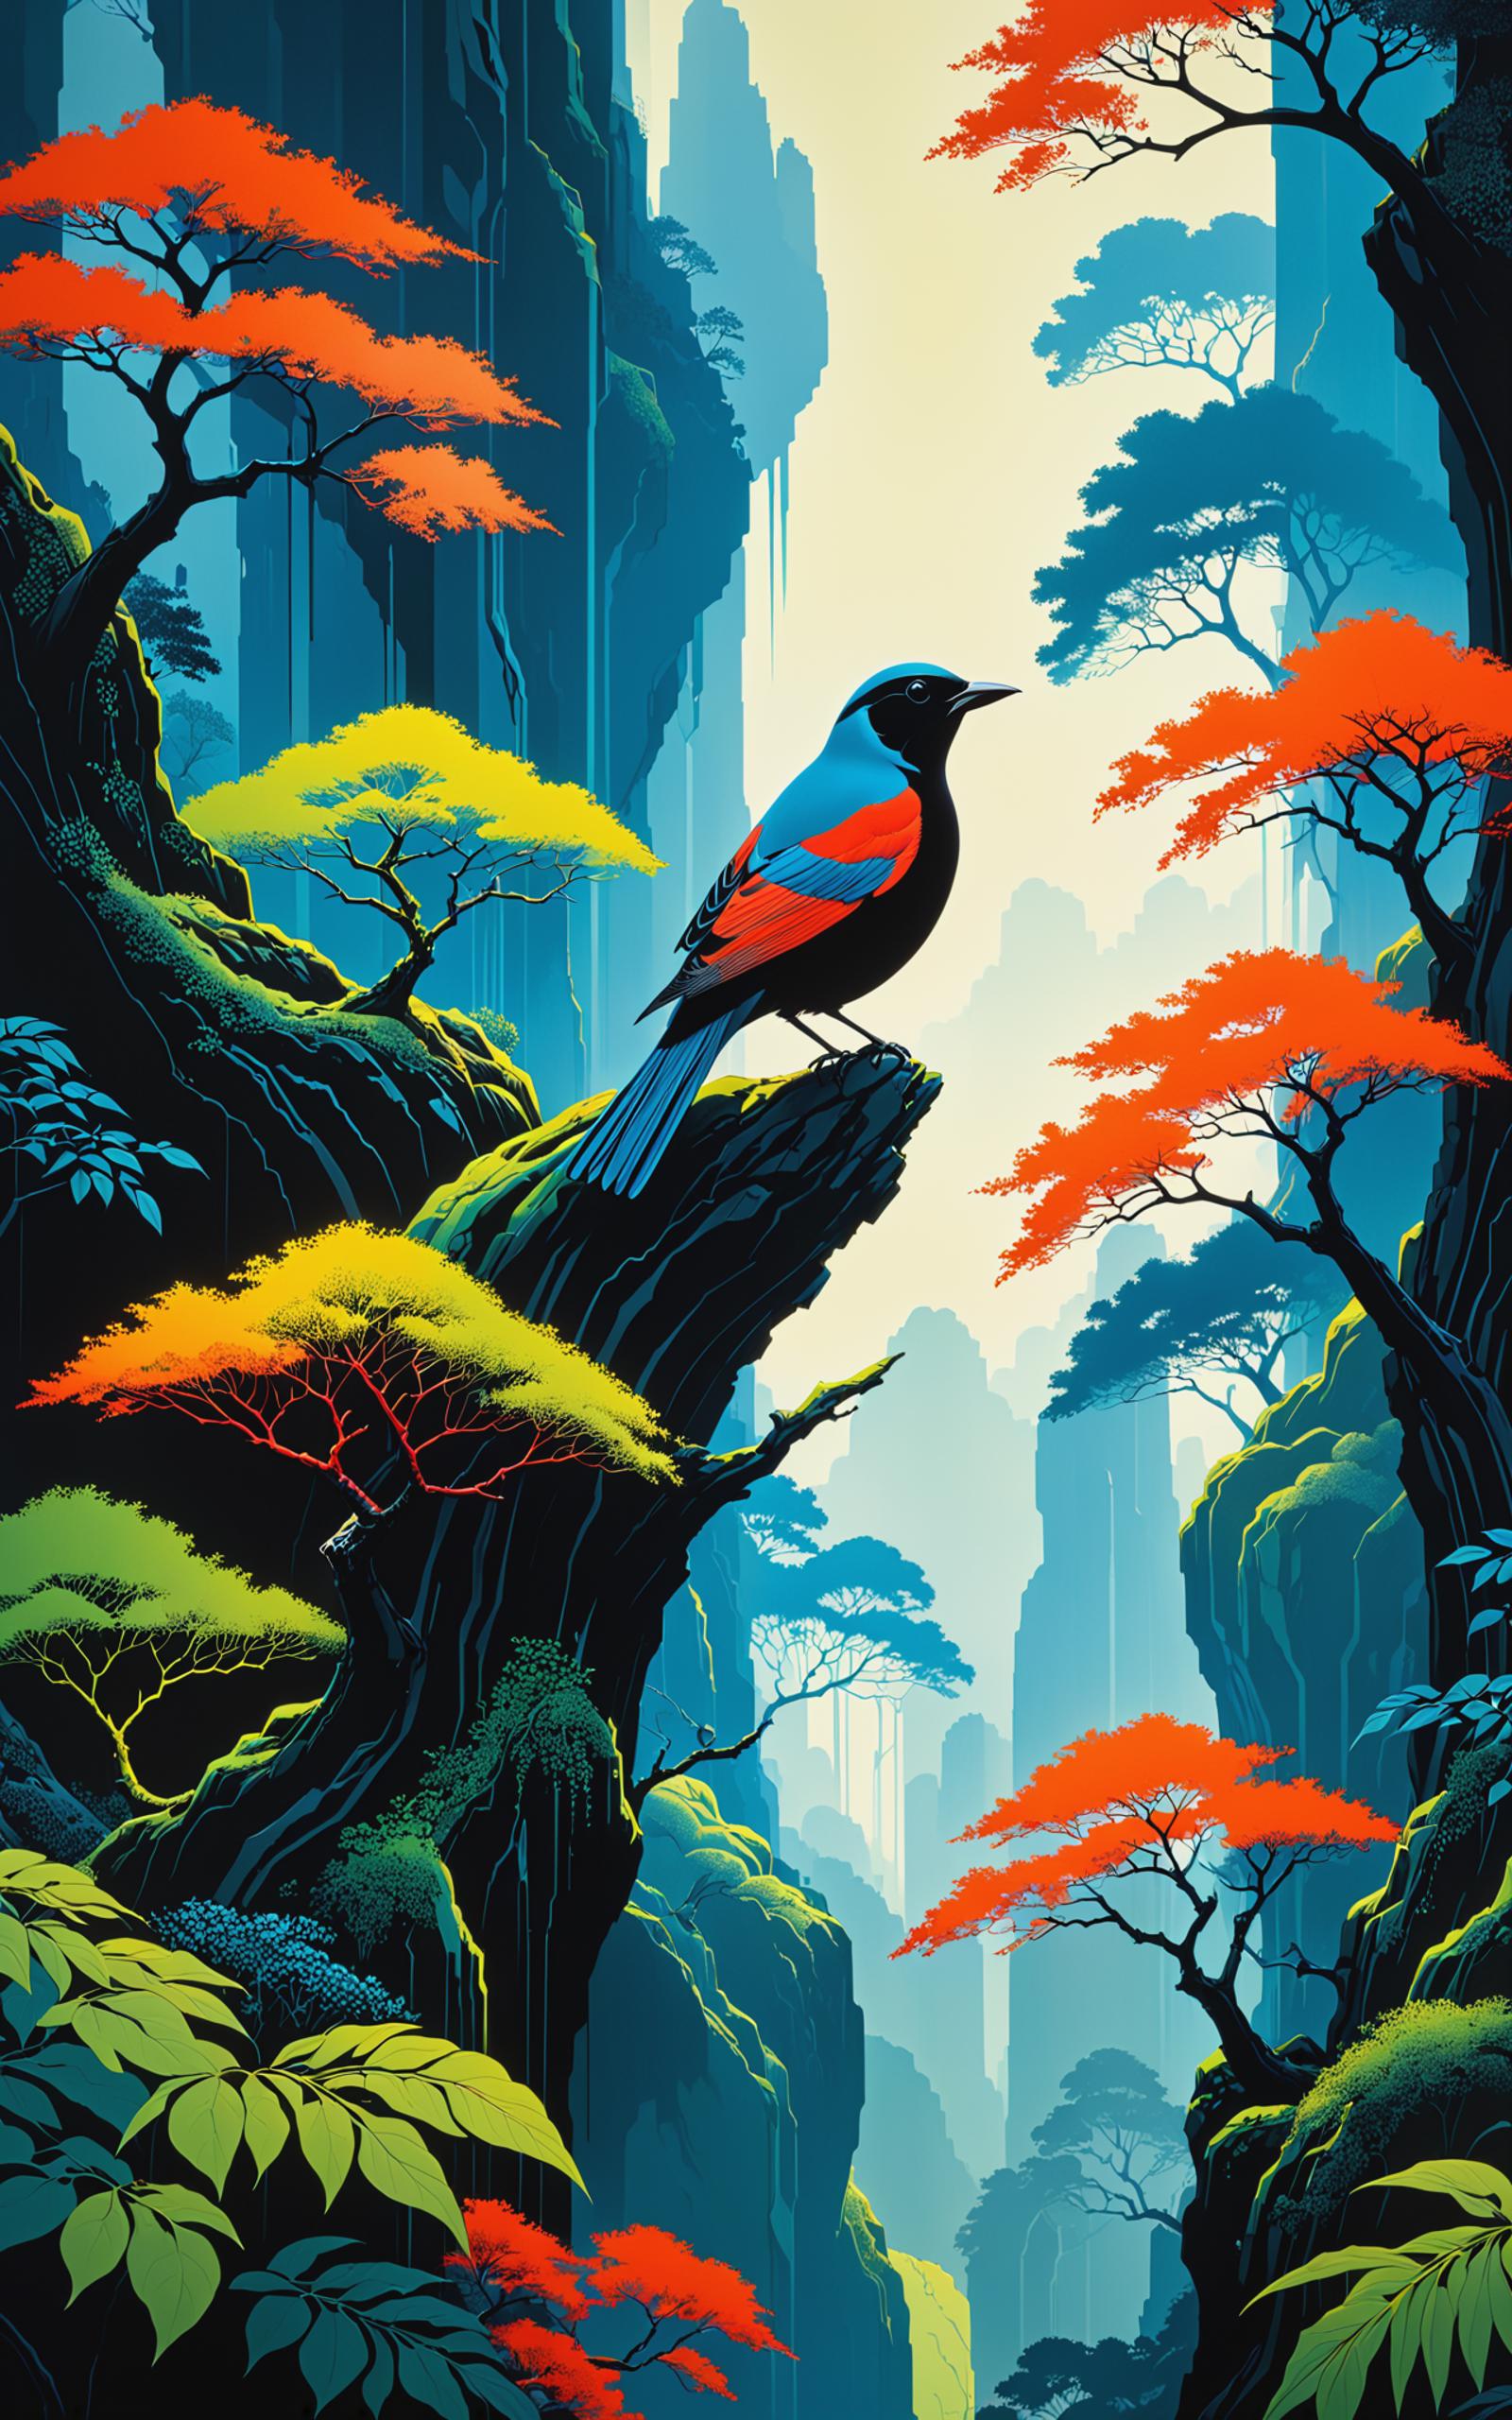 A colorful painting of a bird perched on a rock in a lush, tropical environment.